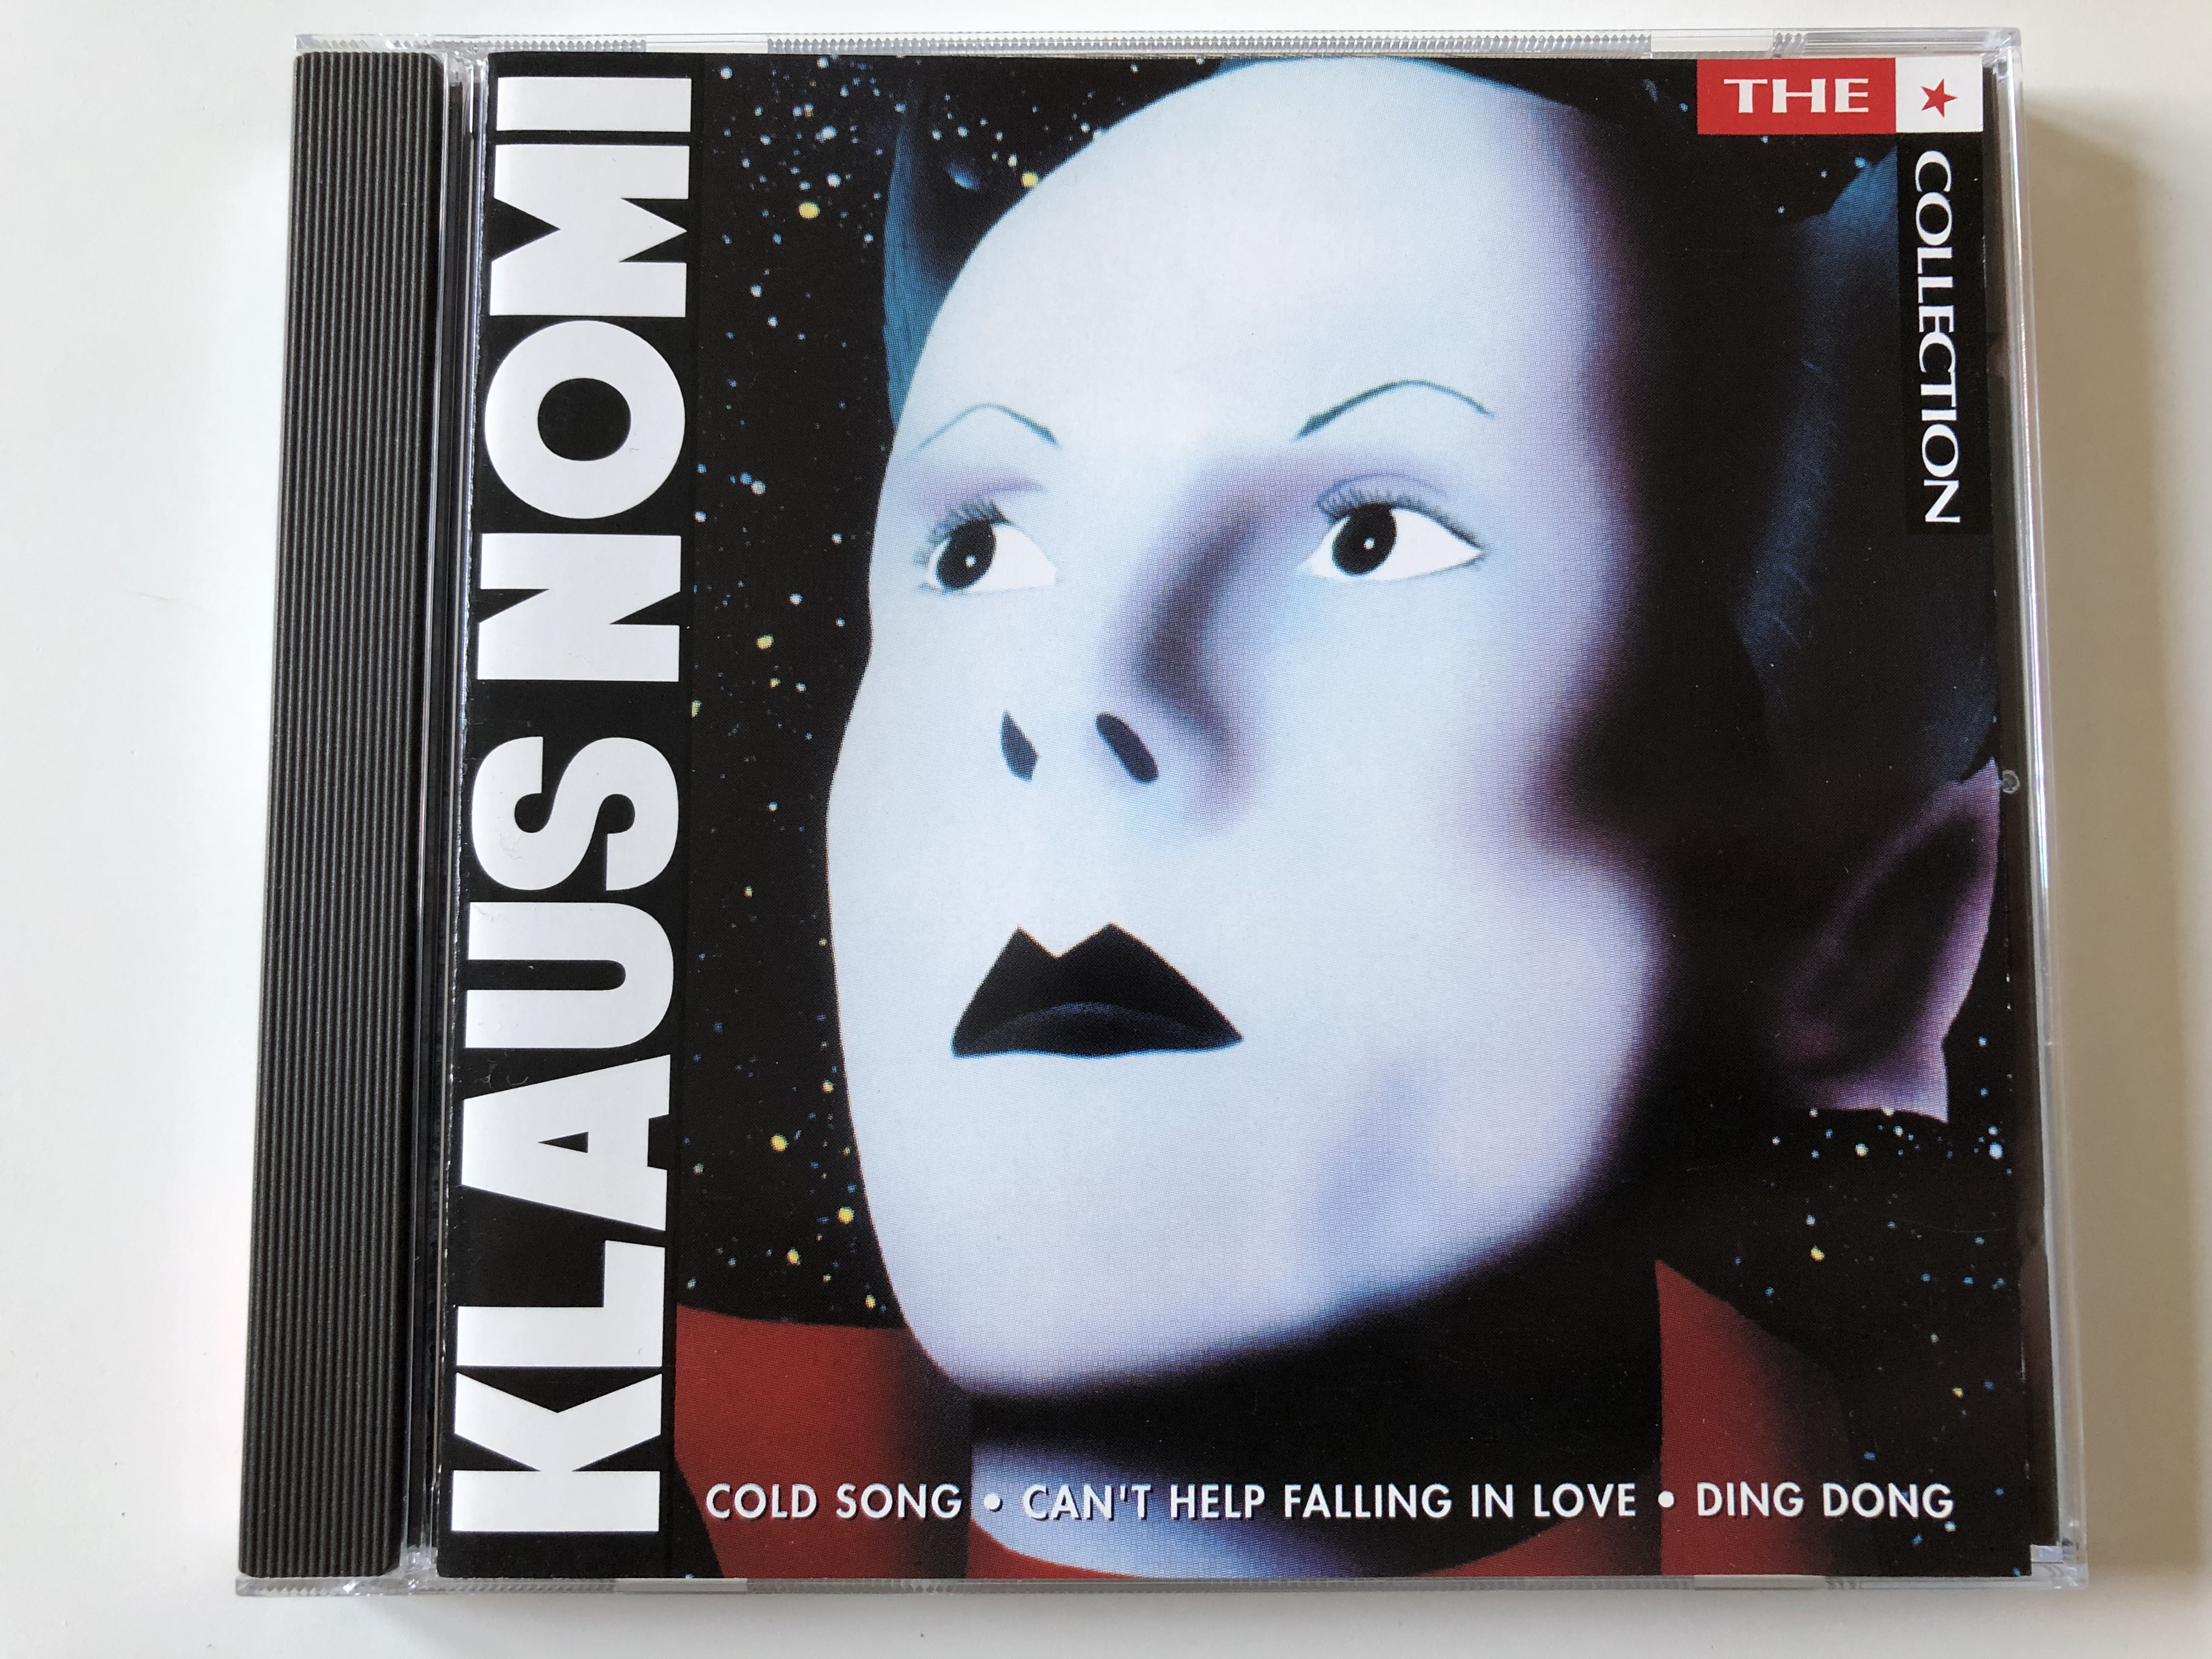 klaus-nomi-the-collection-cold-song-can-t-help-falling-in-love-ding-dong-bmg-audio-cd-1991-stereo-nd75004-1-.jpg